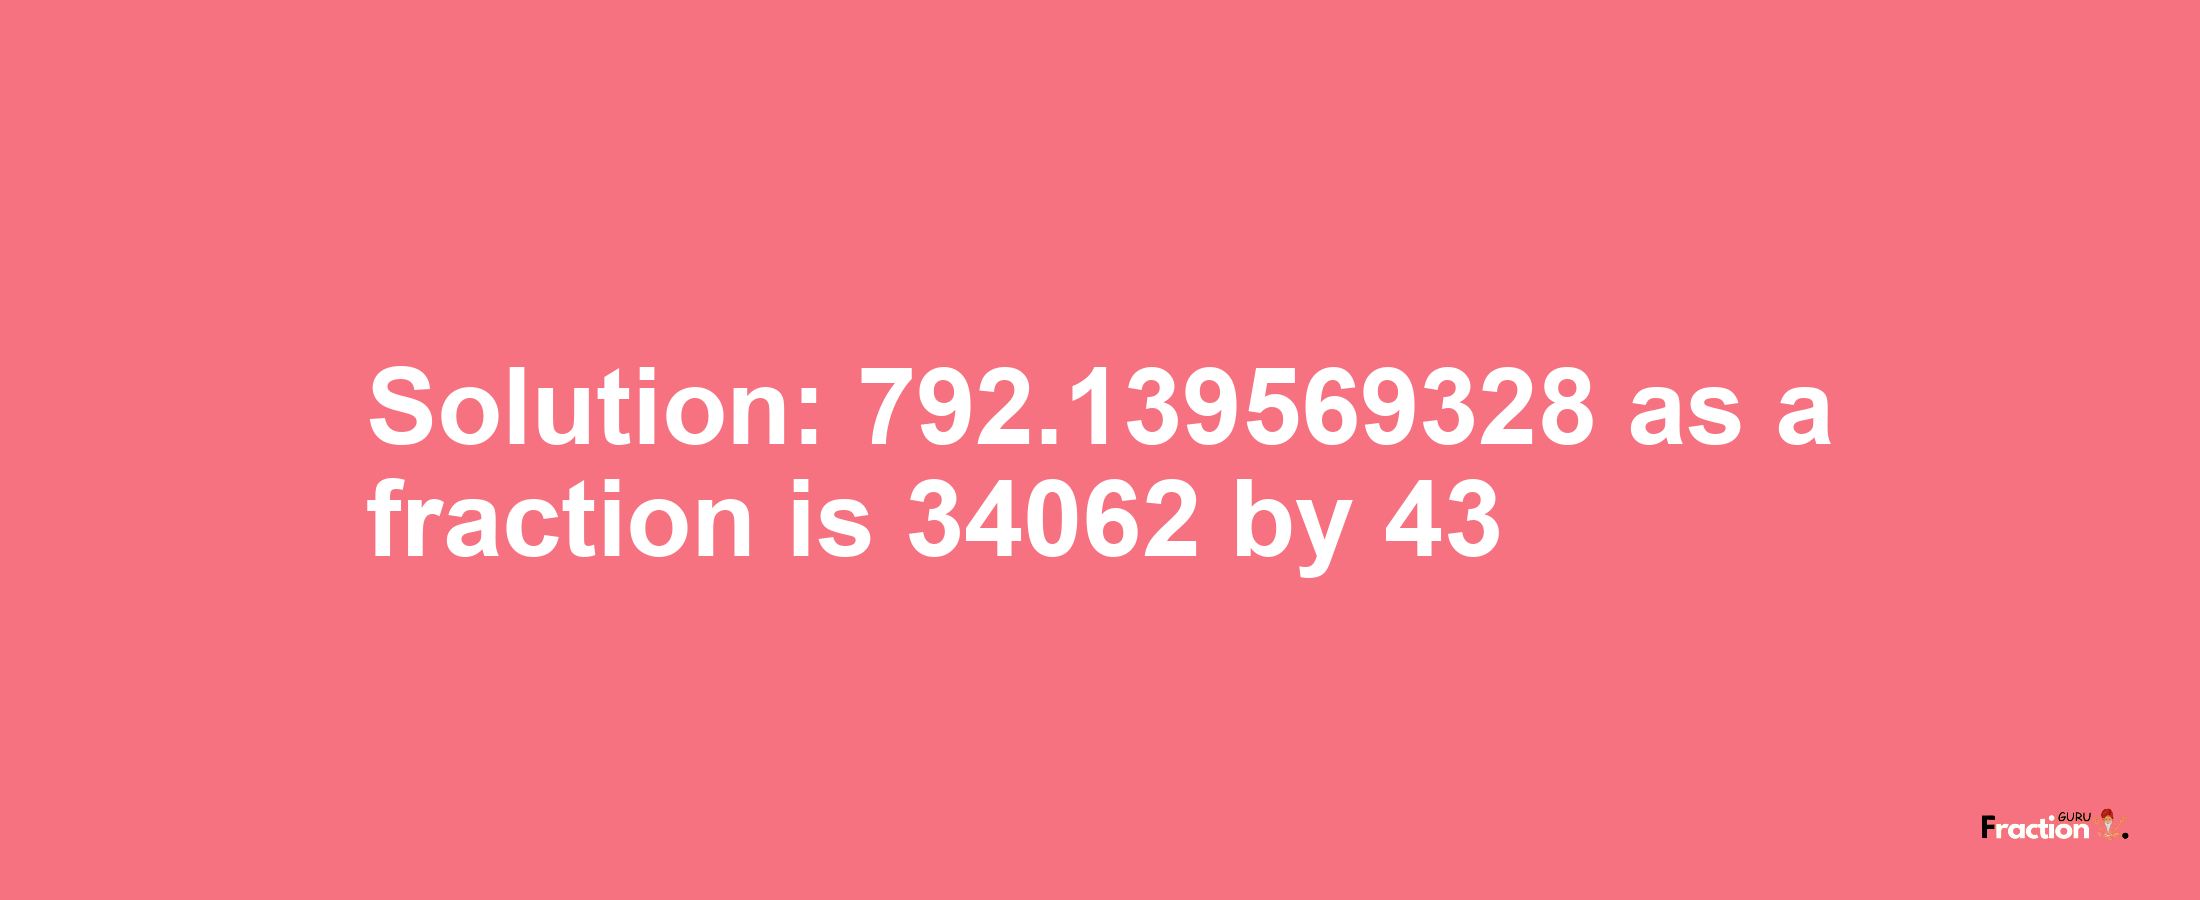 Solution:792.139569328 as a fraction is 34062/43